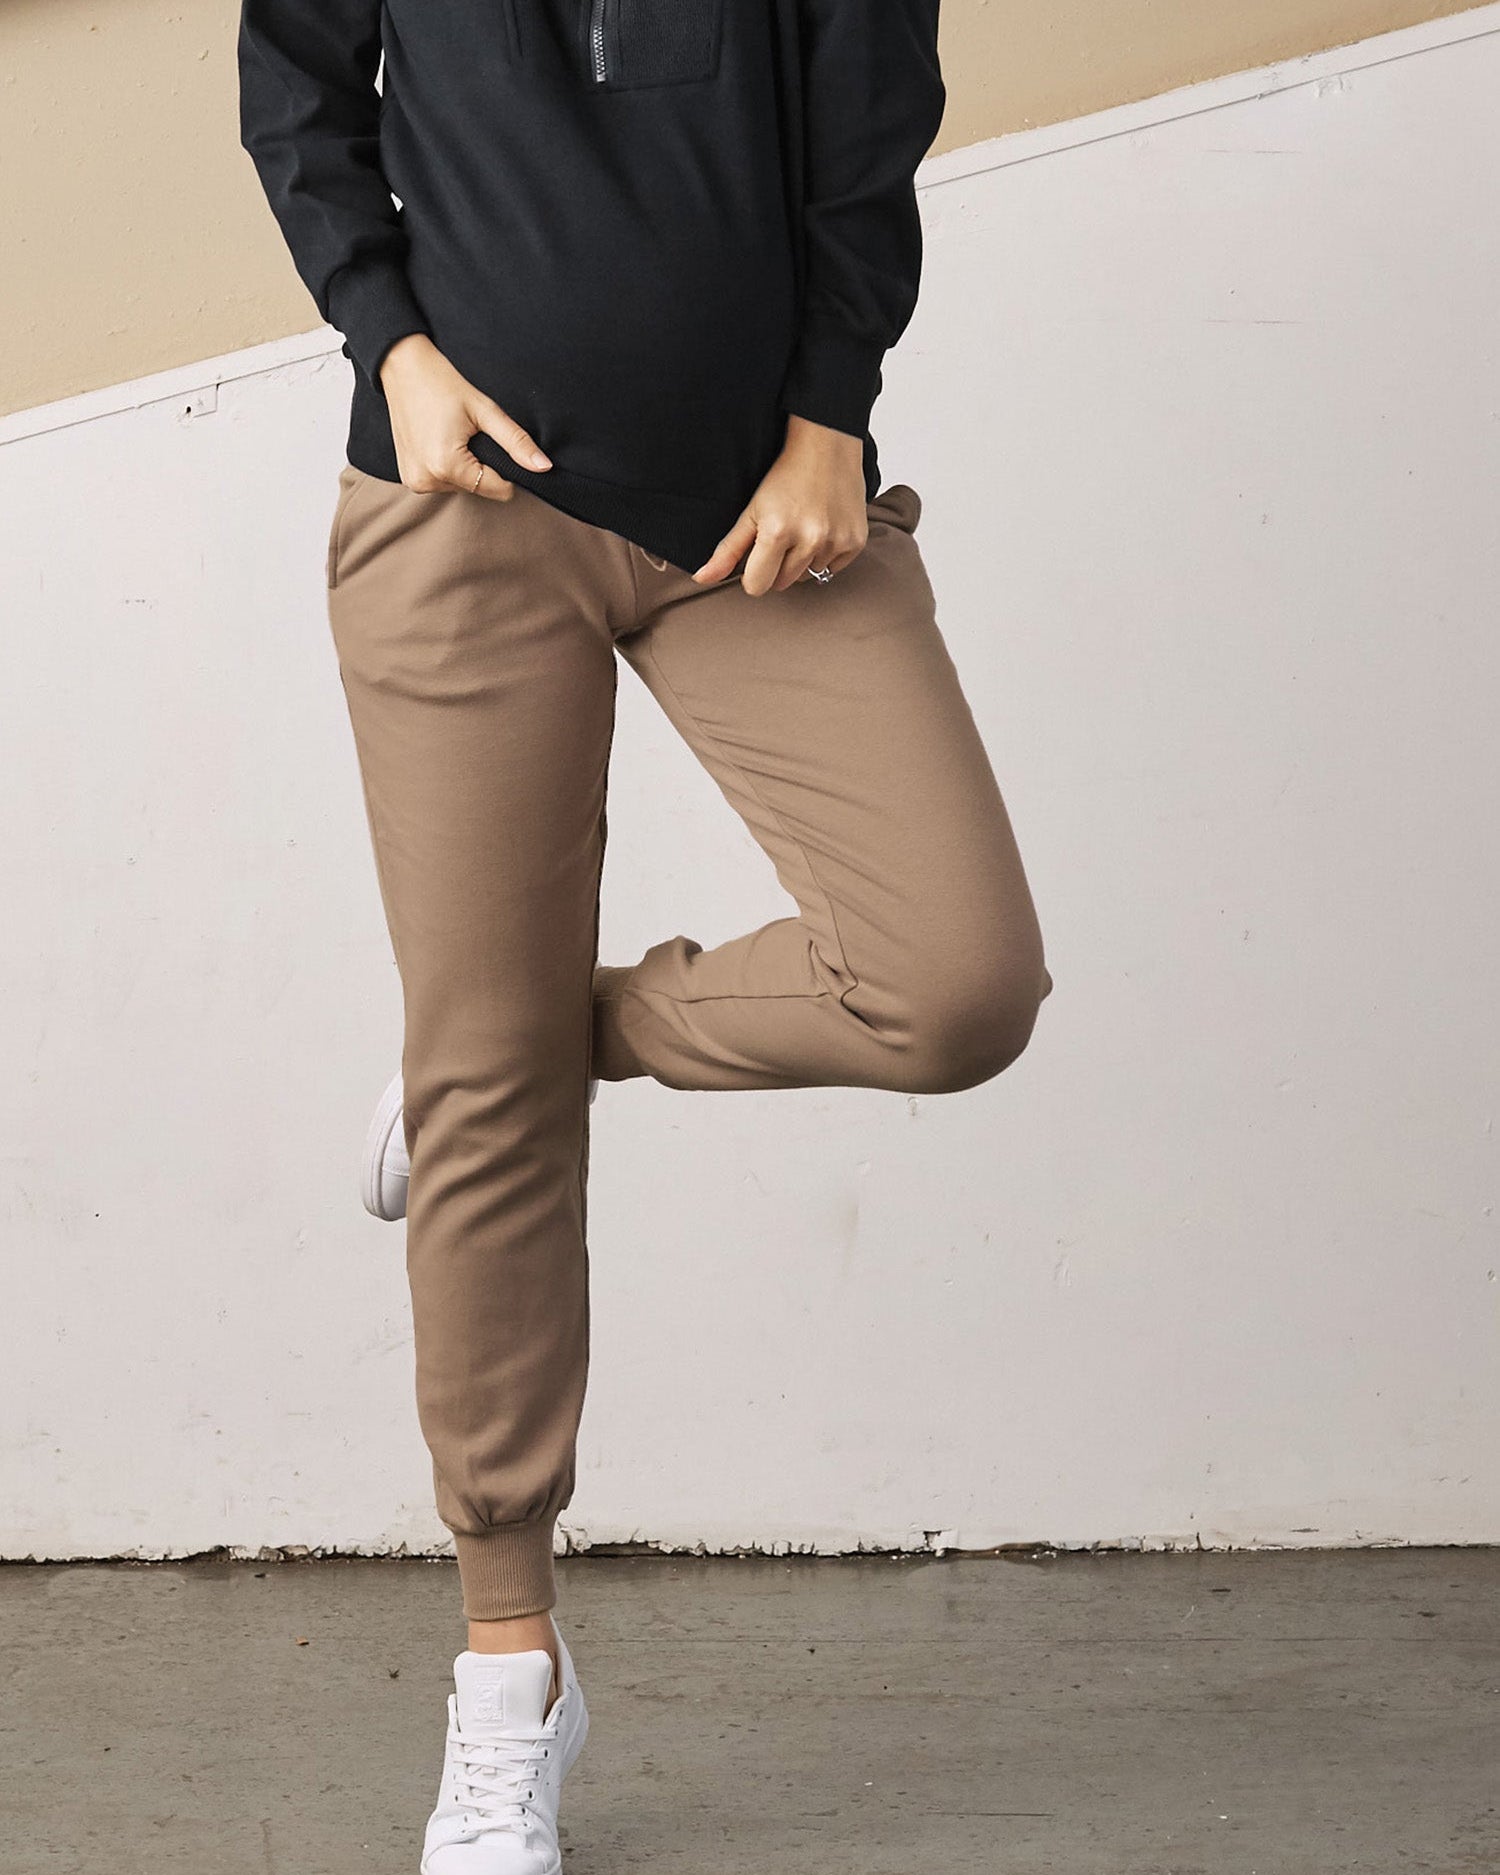 Main View - A Pregnant Woman in Calla Maternity Cotton Sweatpants in Iced Coffee Color from Angel Maternity (6728293679198)